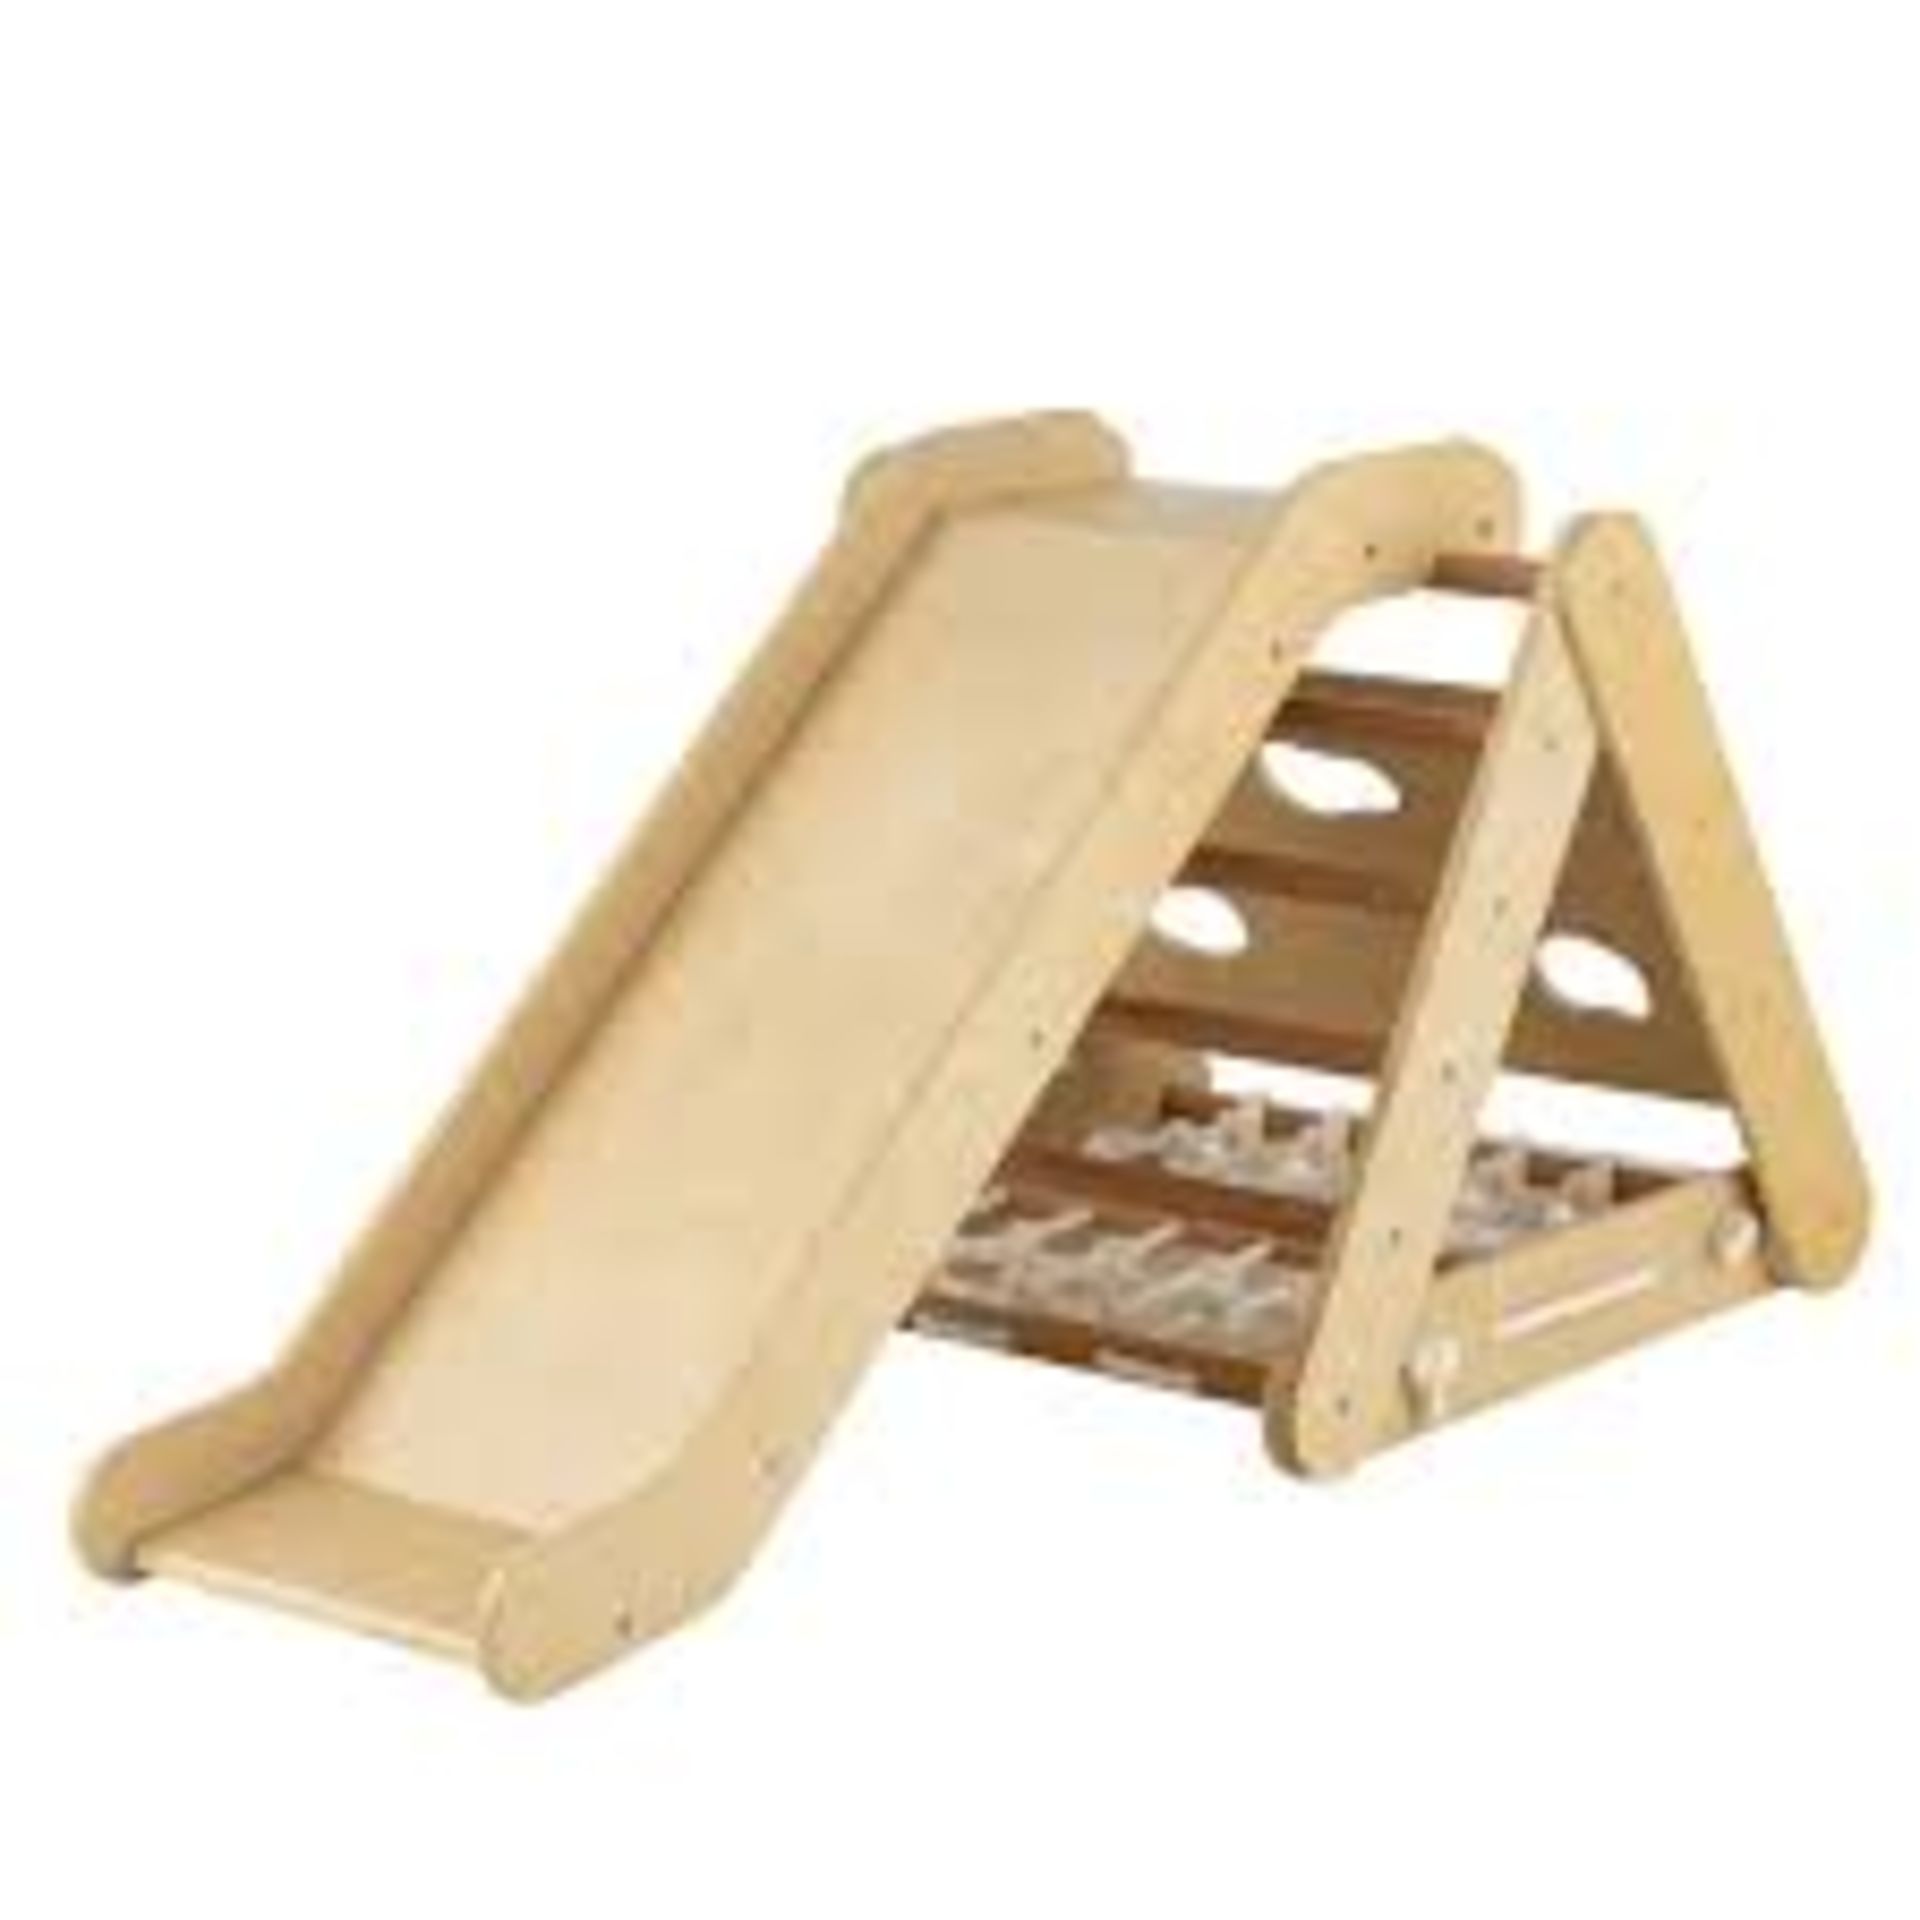 4-in-1 Wooden Triangle Climbing Set with Ramp Sliding Board-Natural - ER54